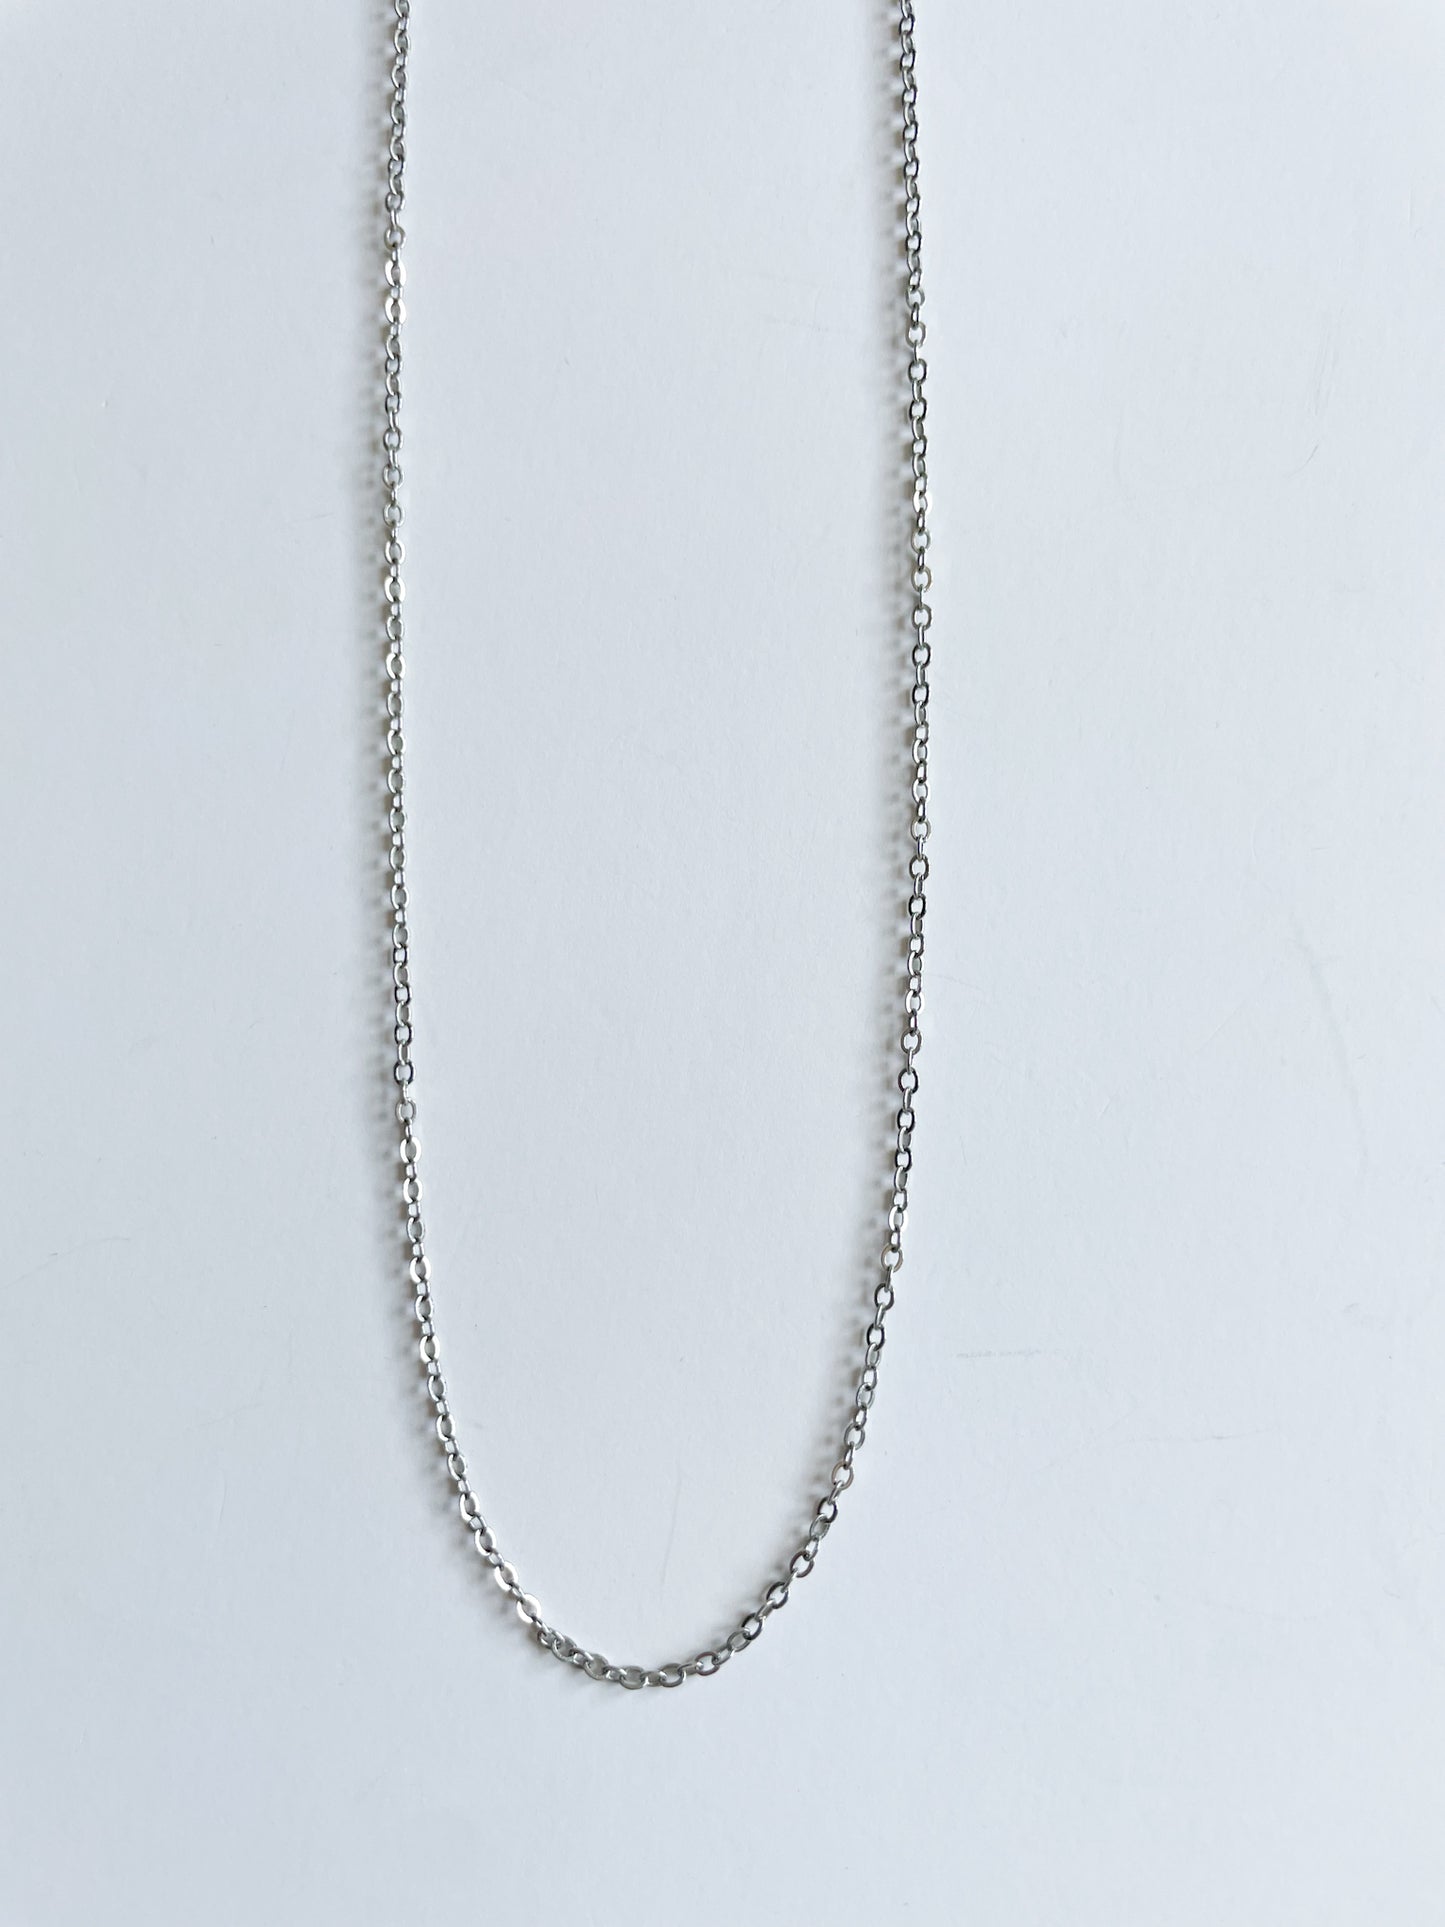 Delicate Silver Chain Link Sparkly Necklace